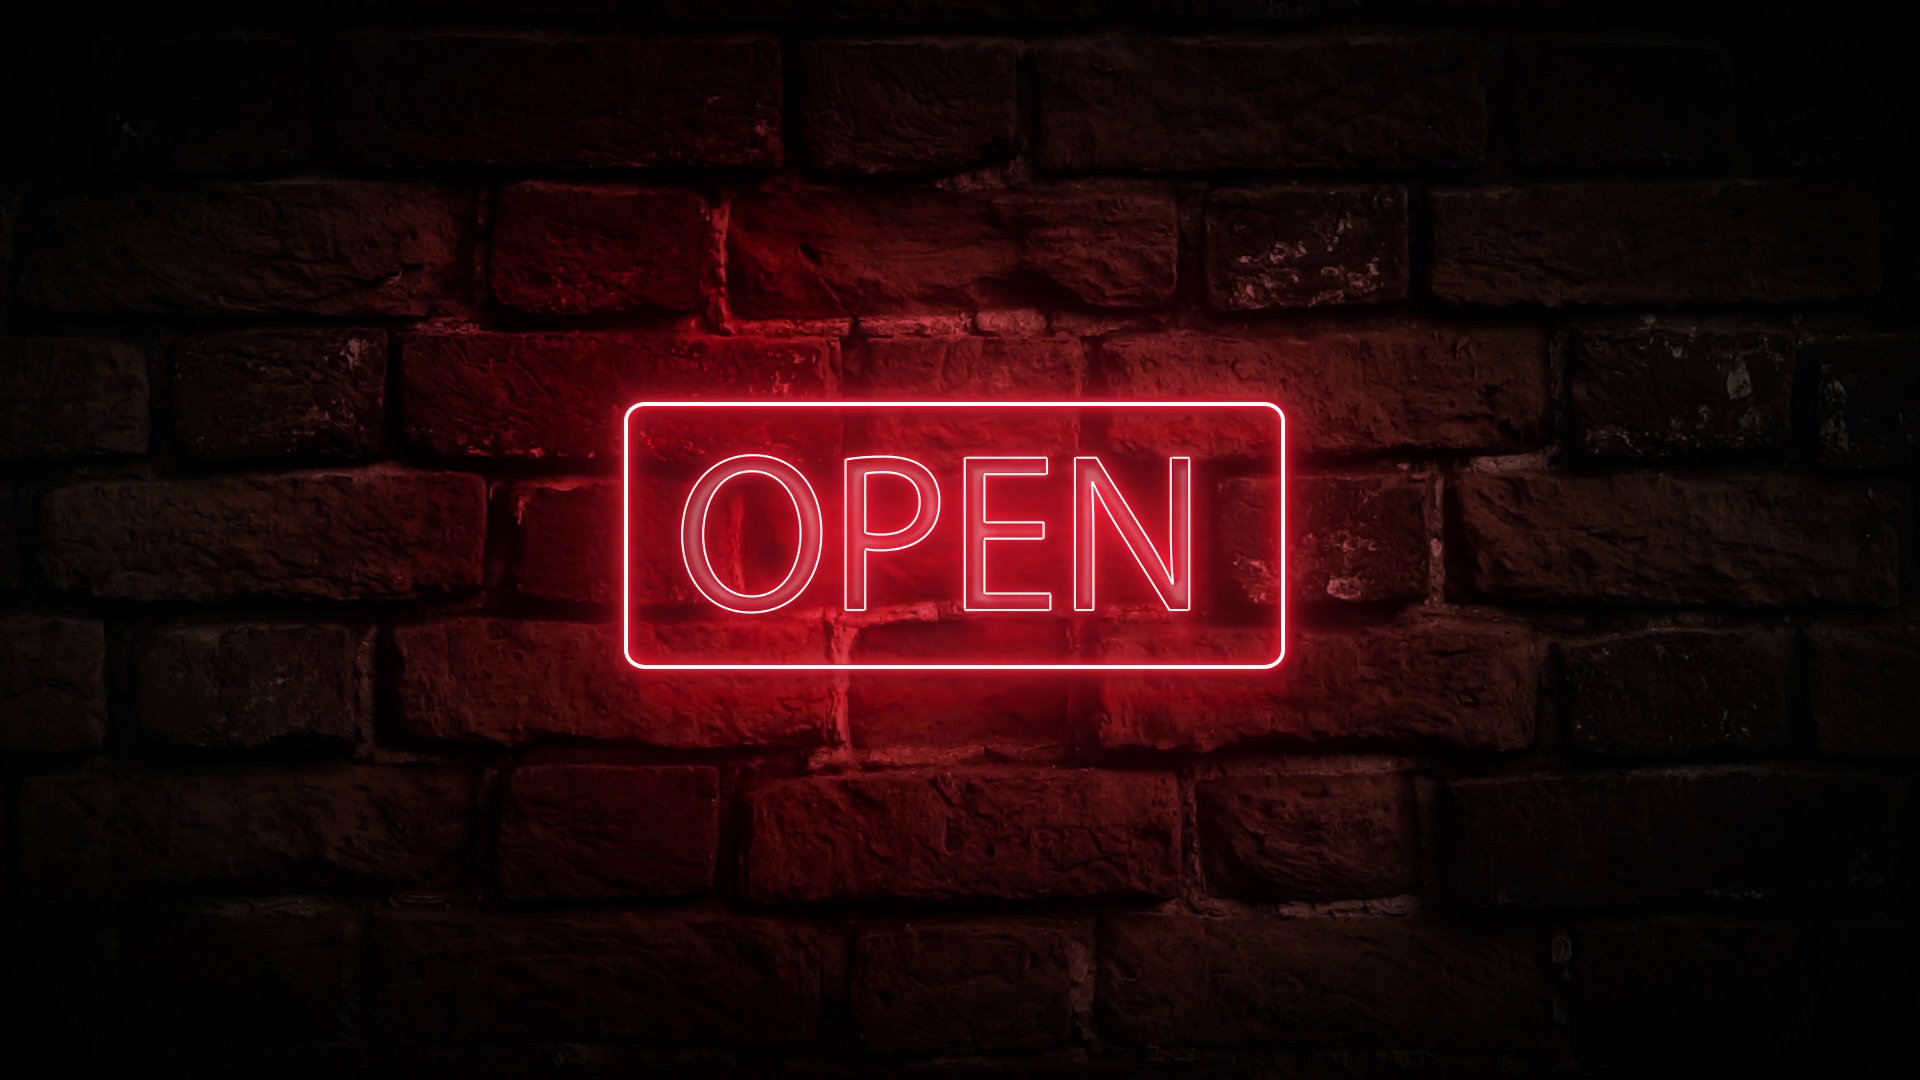 Red-blue neon sign open 24 hours Motion Background - Videoblocks